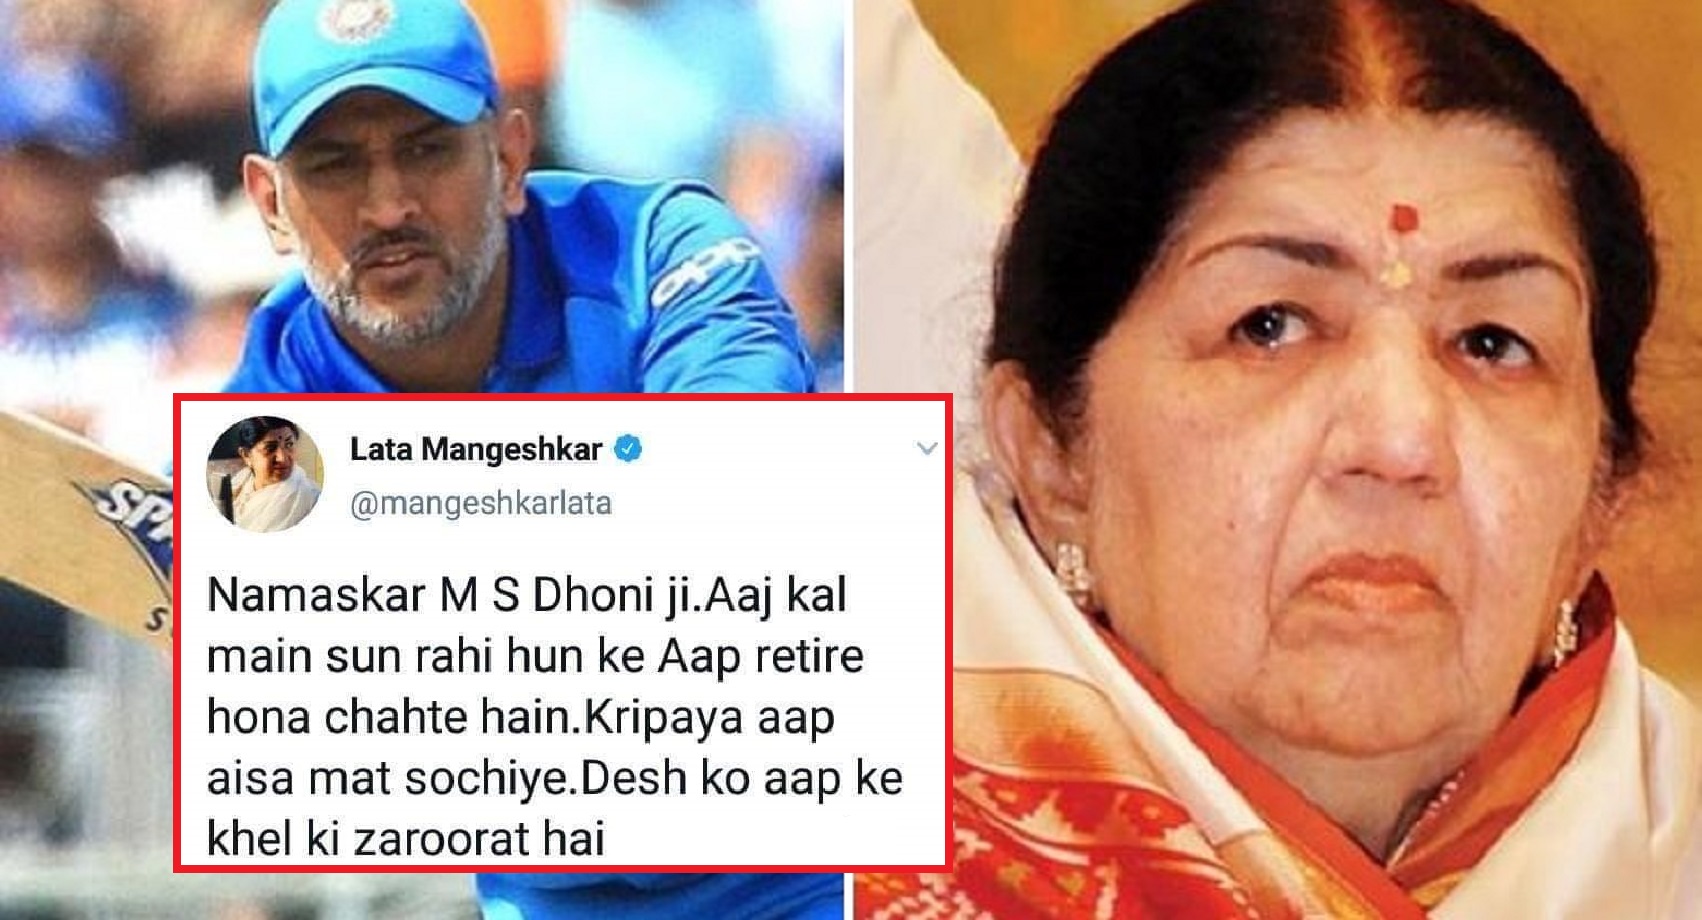 Lata Mangeshkar Urges Dhoni To Not Retire After World Cup Loss in a Heartfelt Post